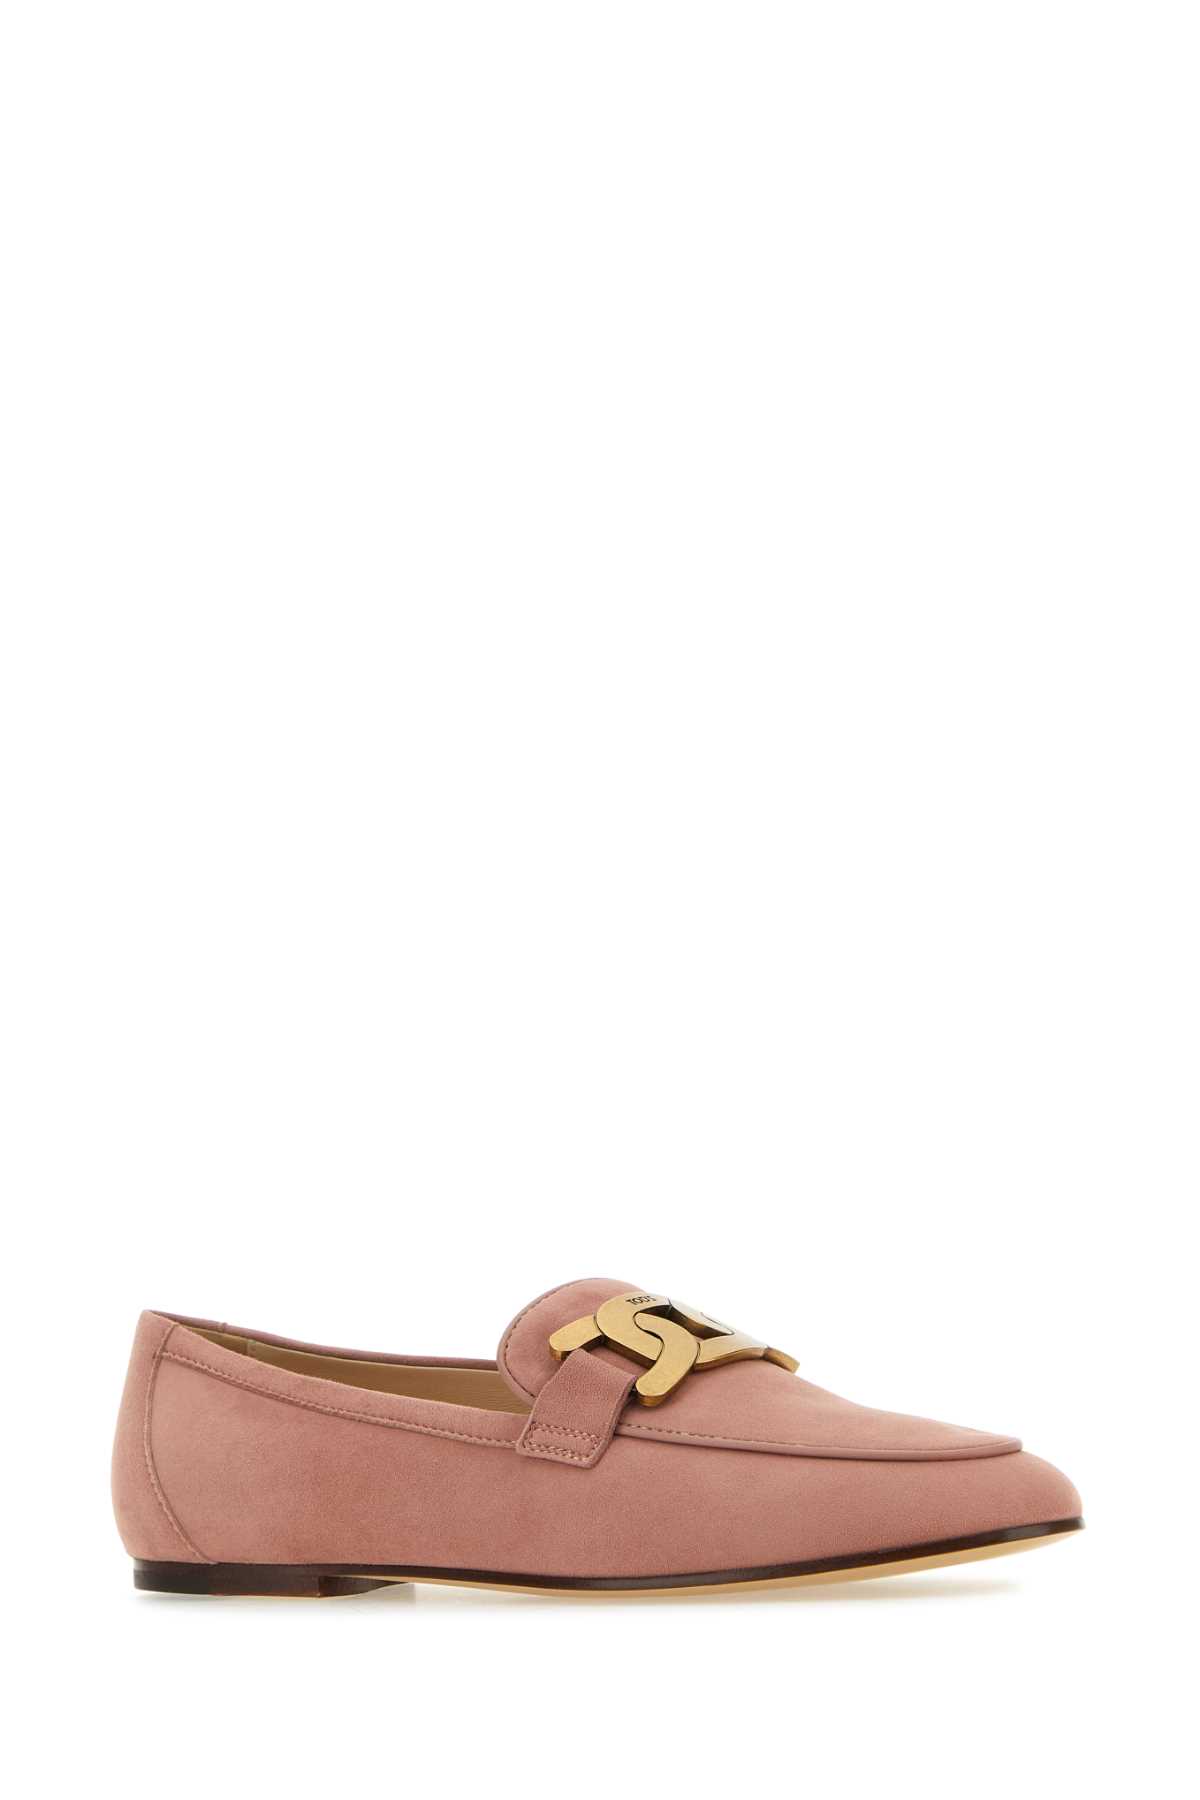 TOD'S ANTIQUED PINK SUEDE KATE LOAFERS